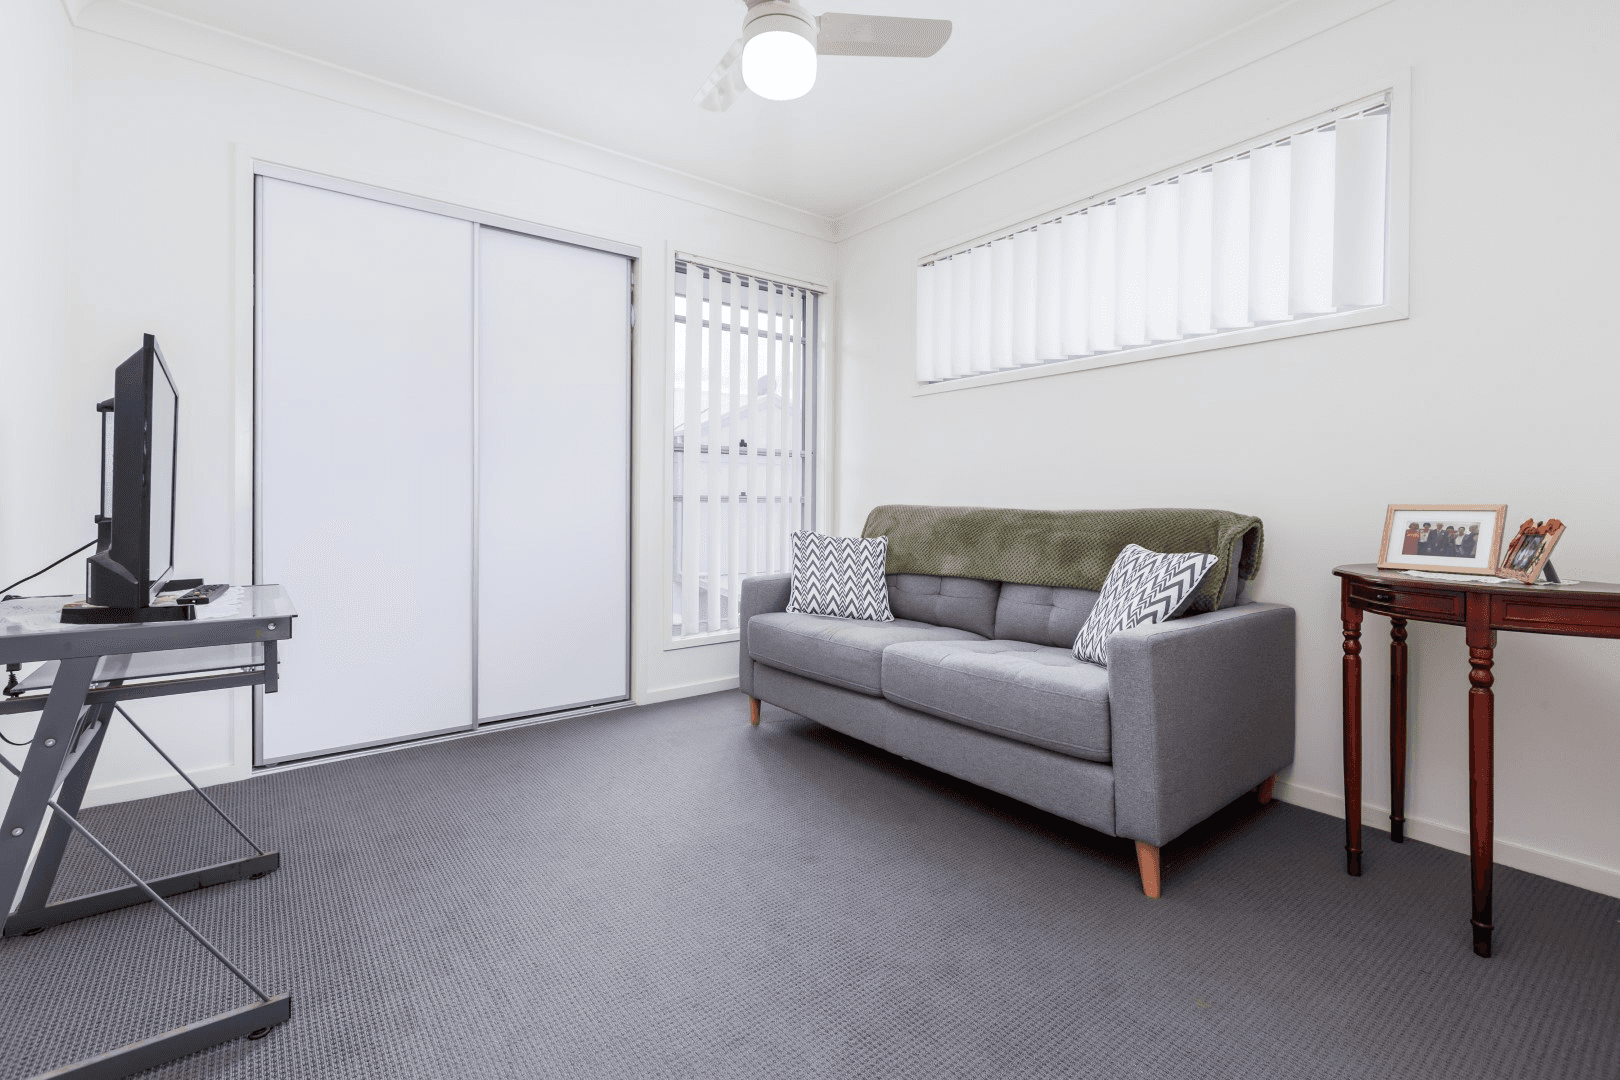 17/108 CEMETERY ROAD, RACEVIEW, QLD 4305